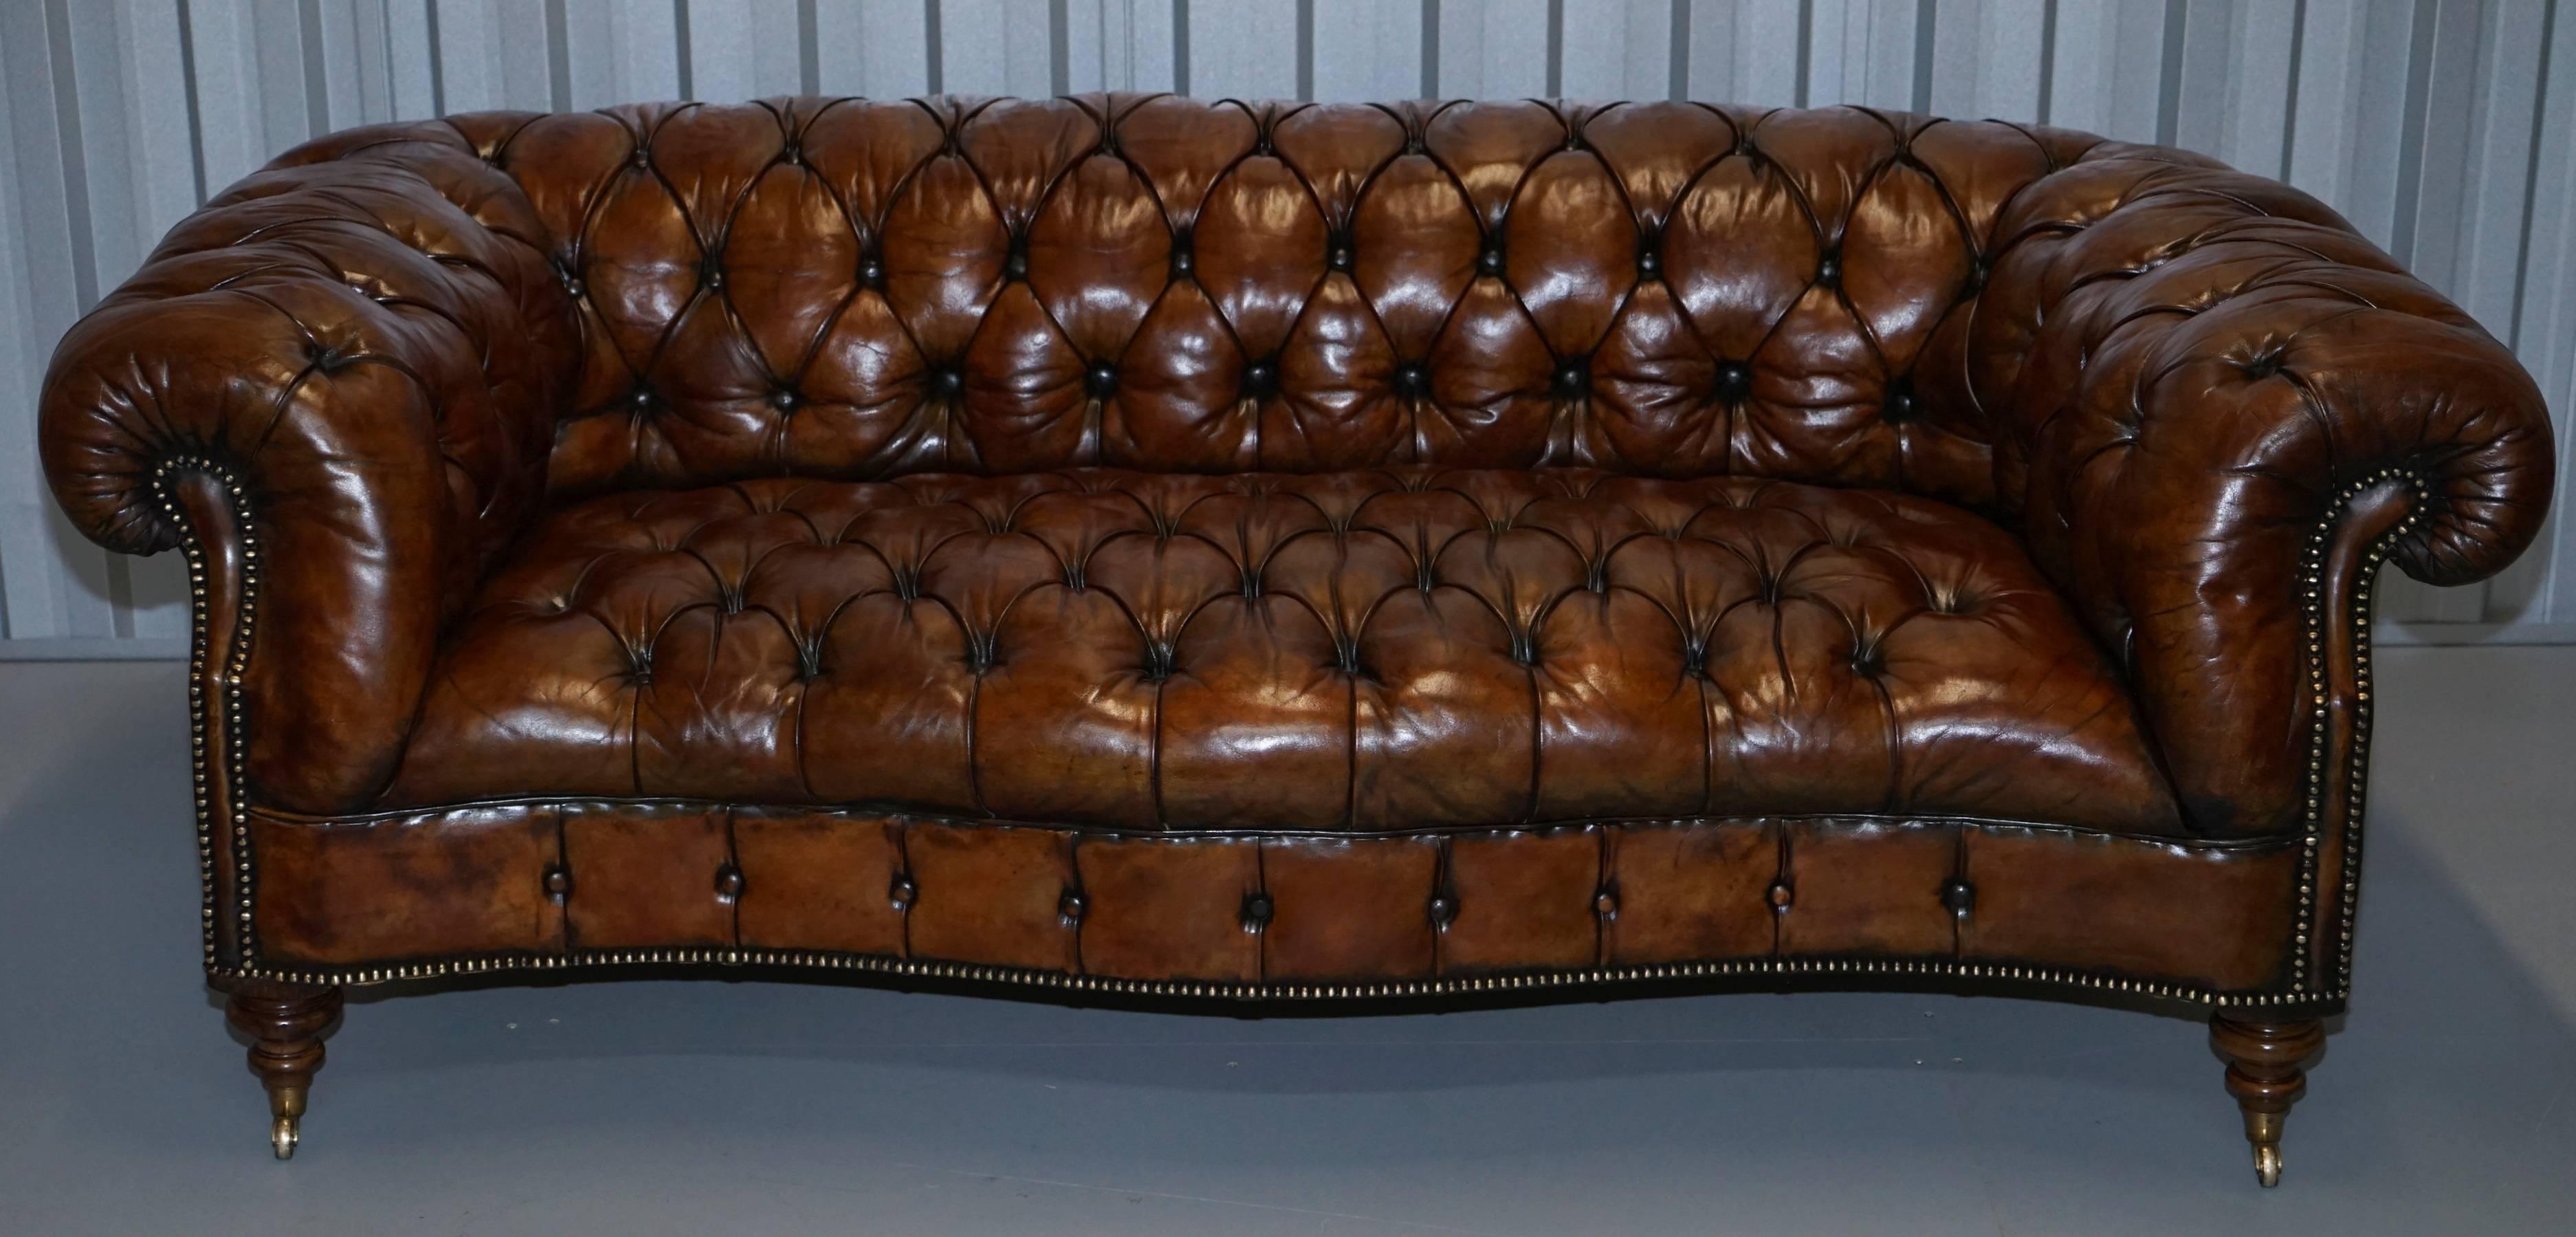 Great Britain (UK) Pair of Victorian Howard & Sons Style Serpentine Fronted Chesterfield Club Sofas